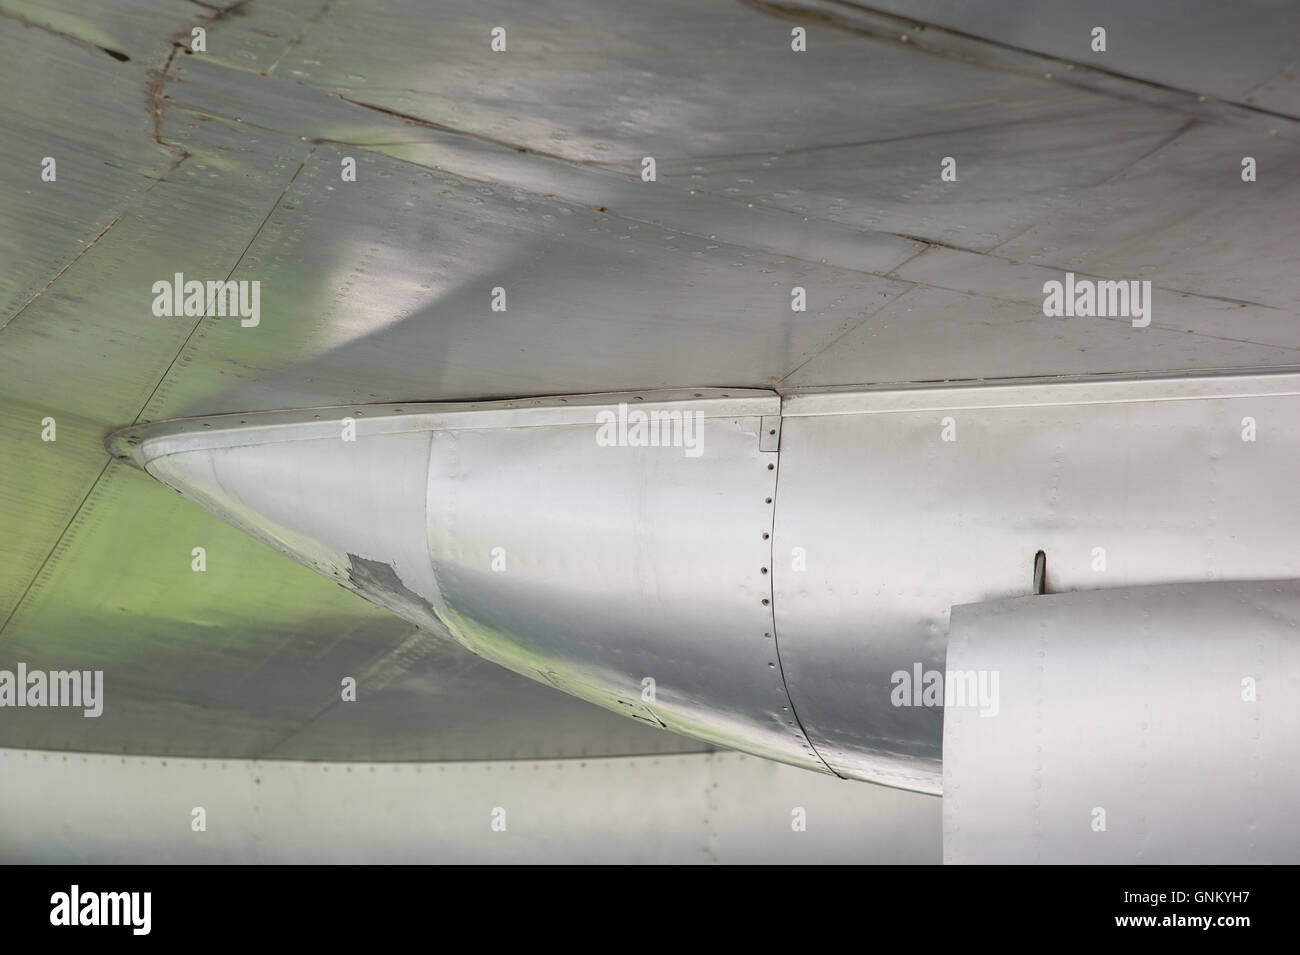 Aluminum fuselage and rivets on old airplane Stock Photo